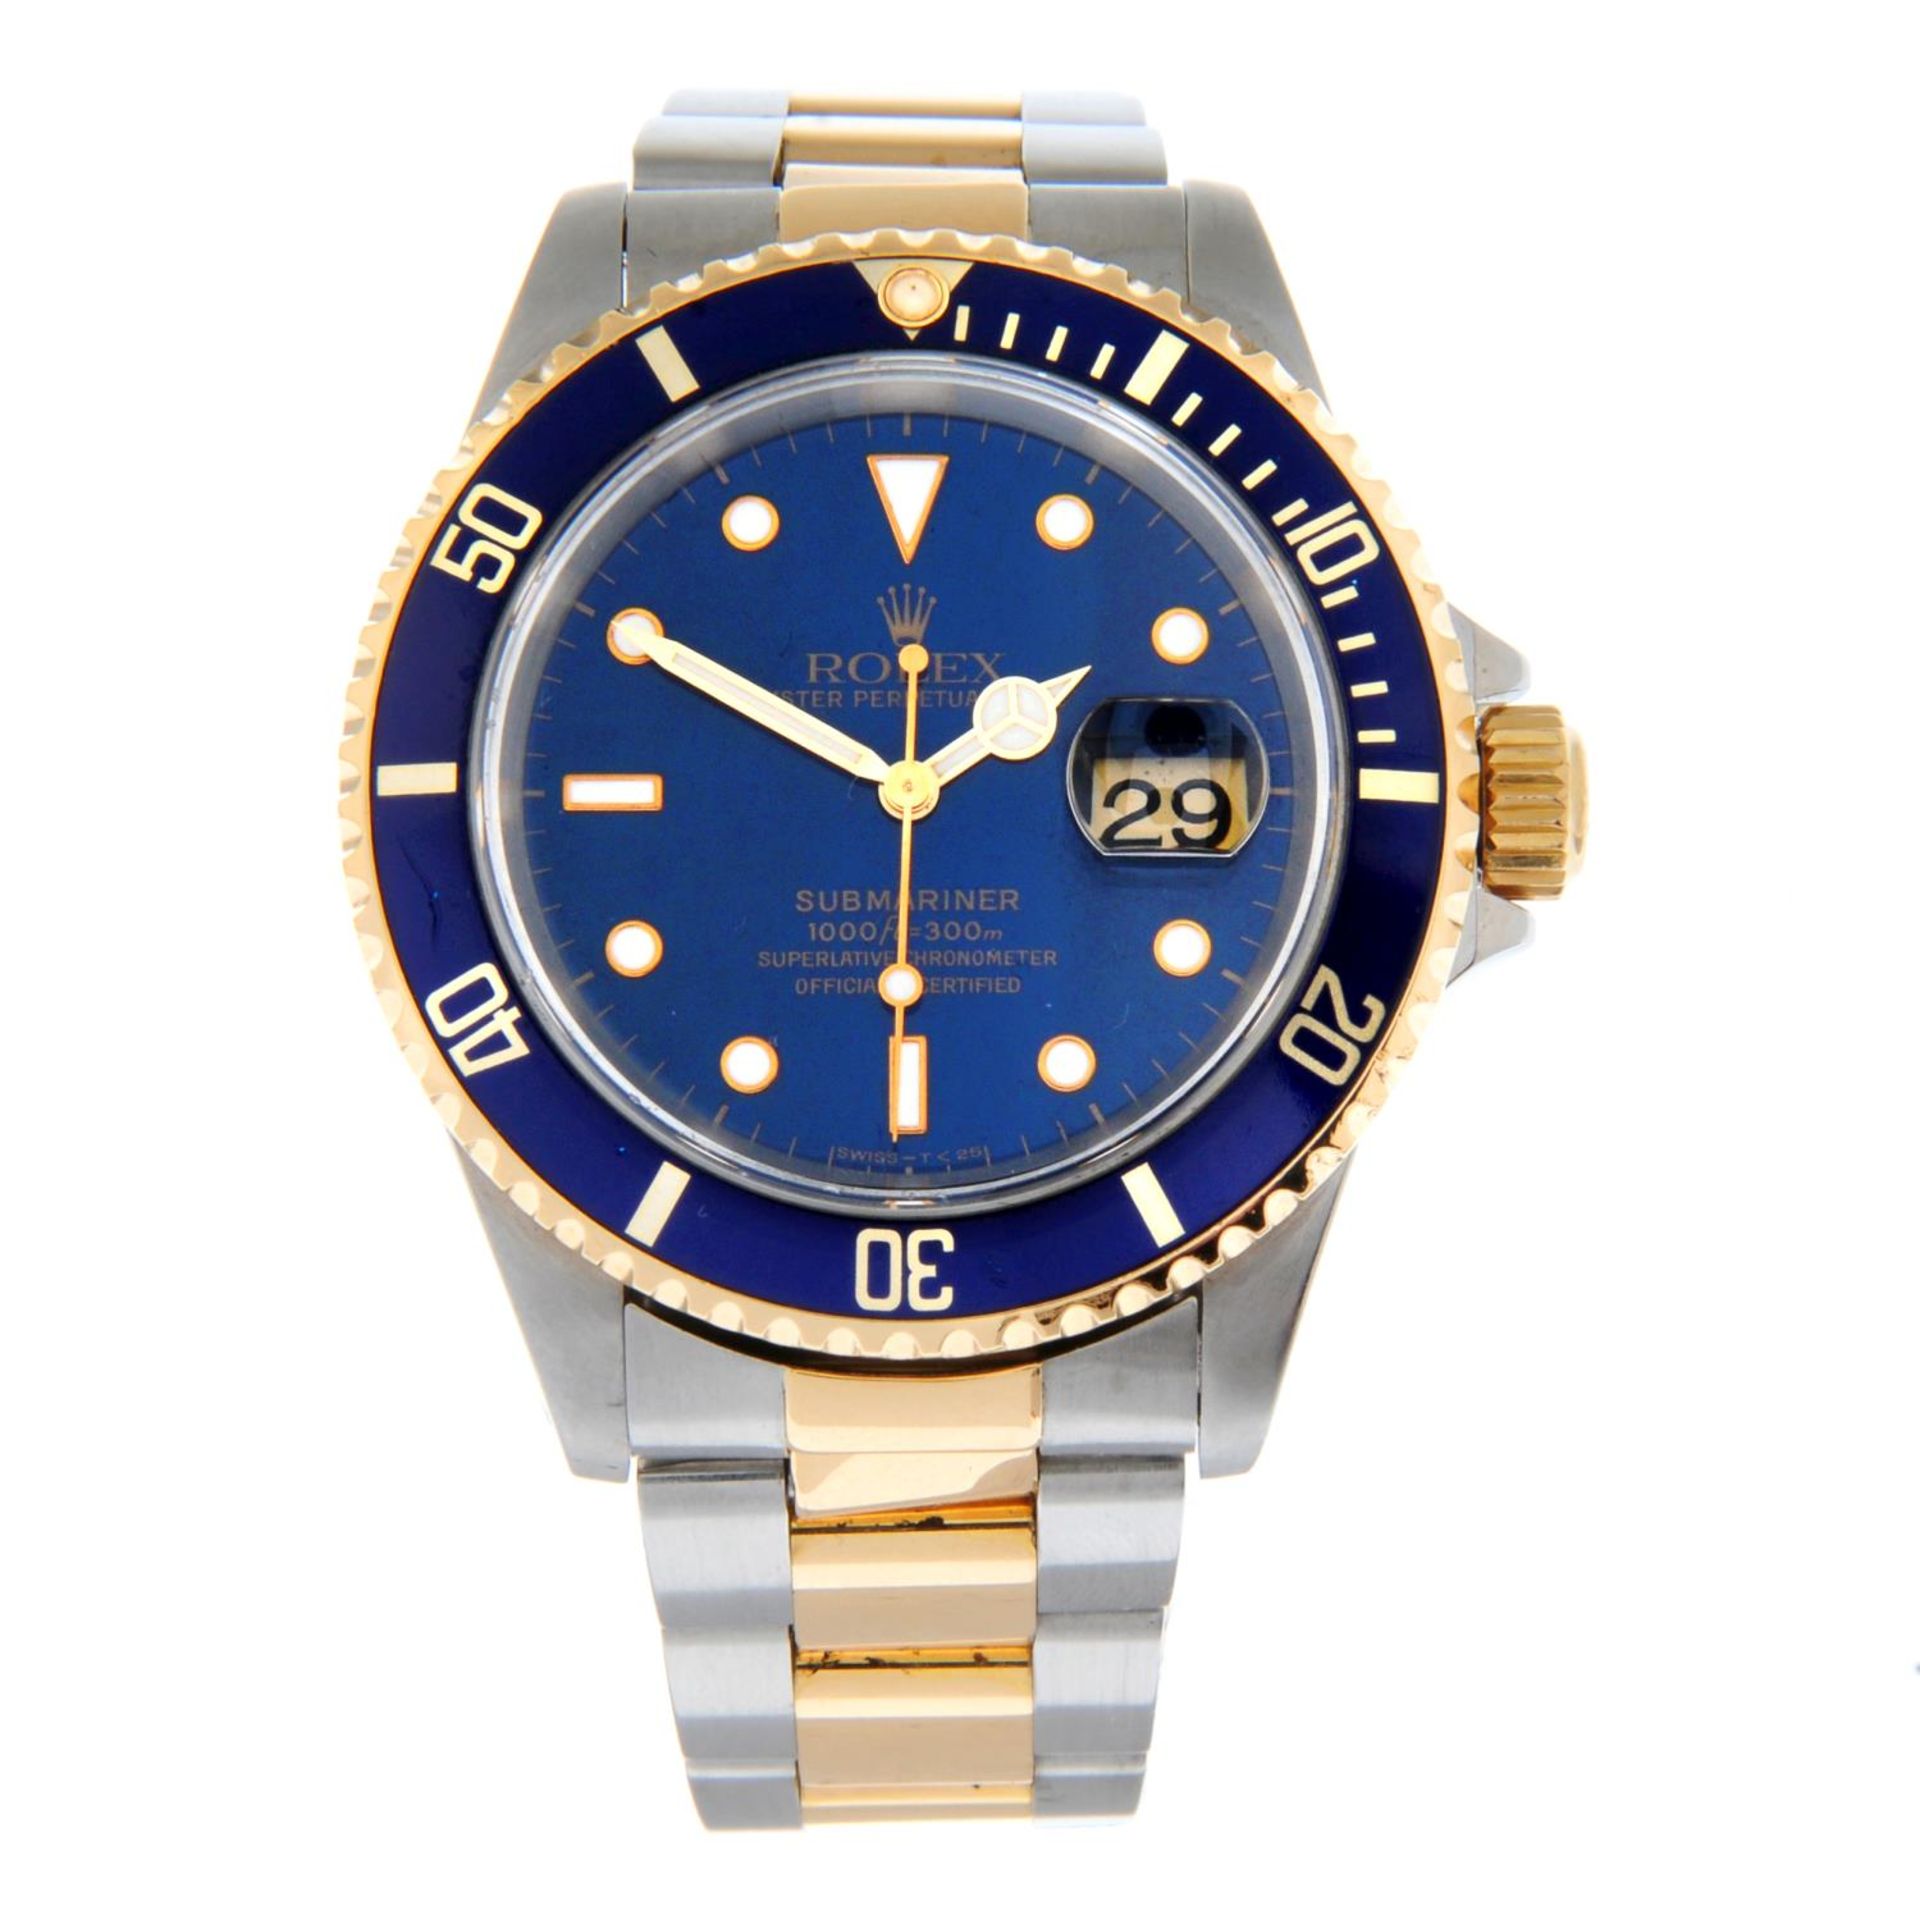 ROLEX - an Oyster Perpetual Date Submariner bracelet watch.